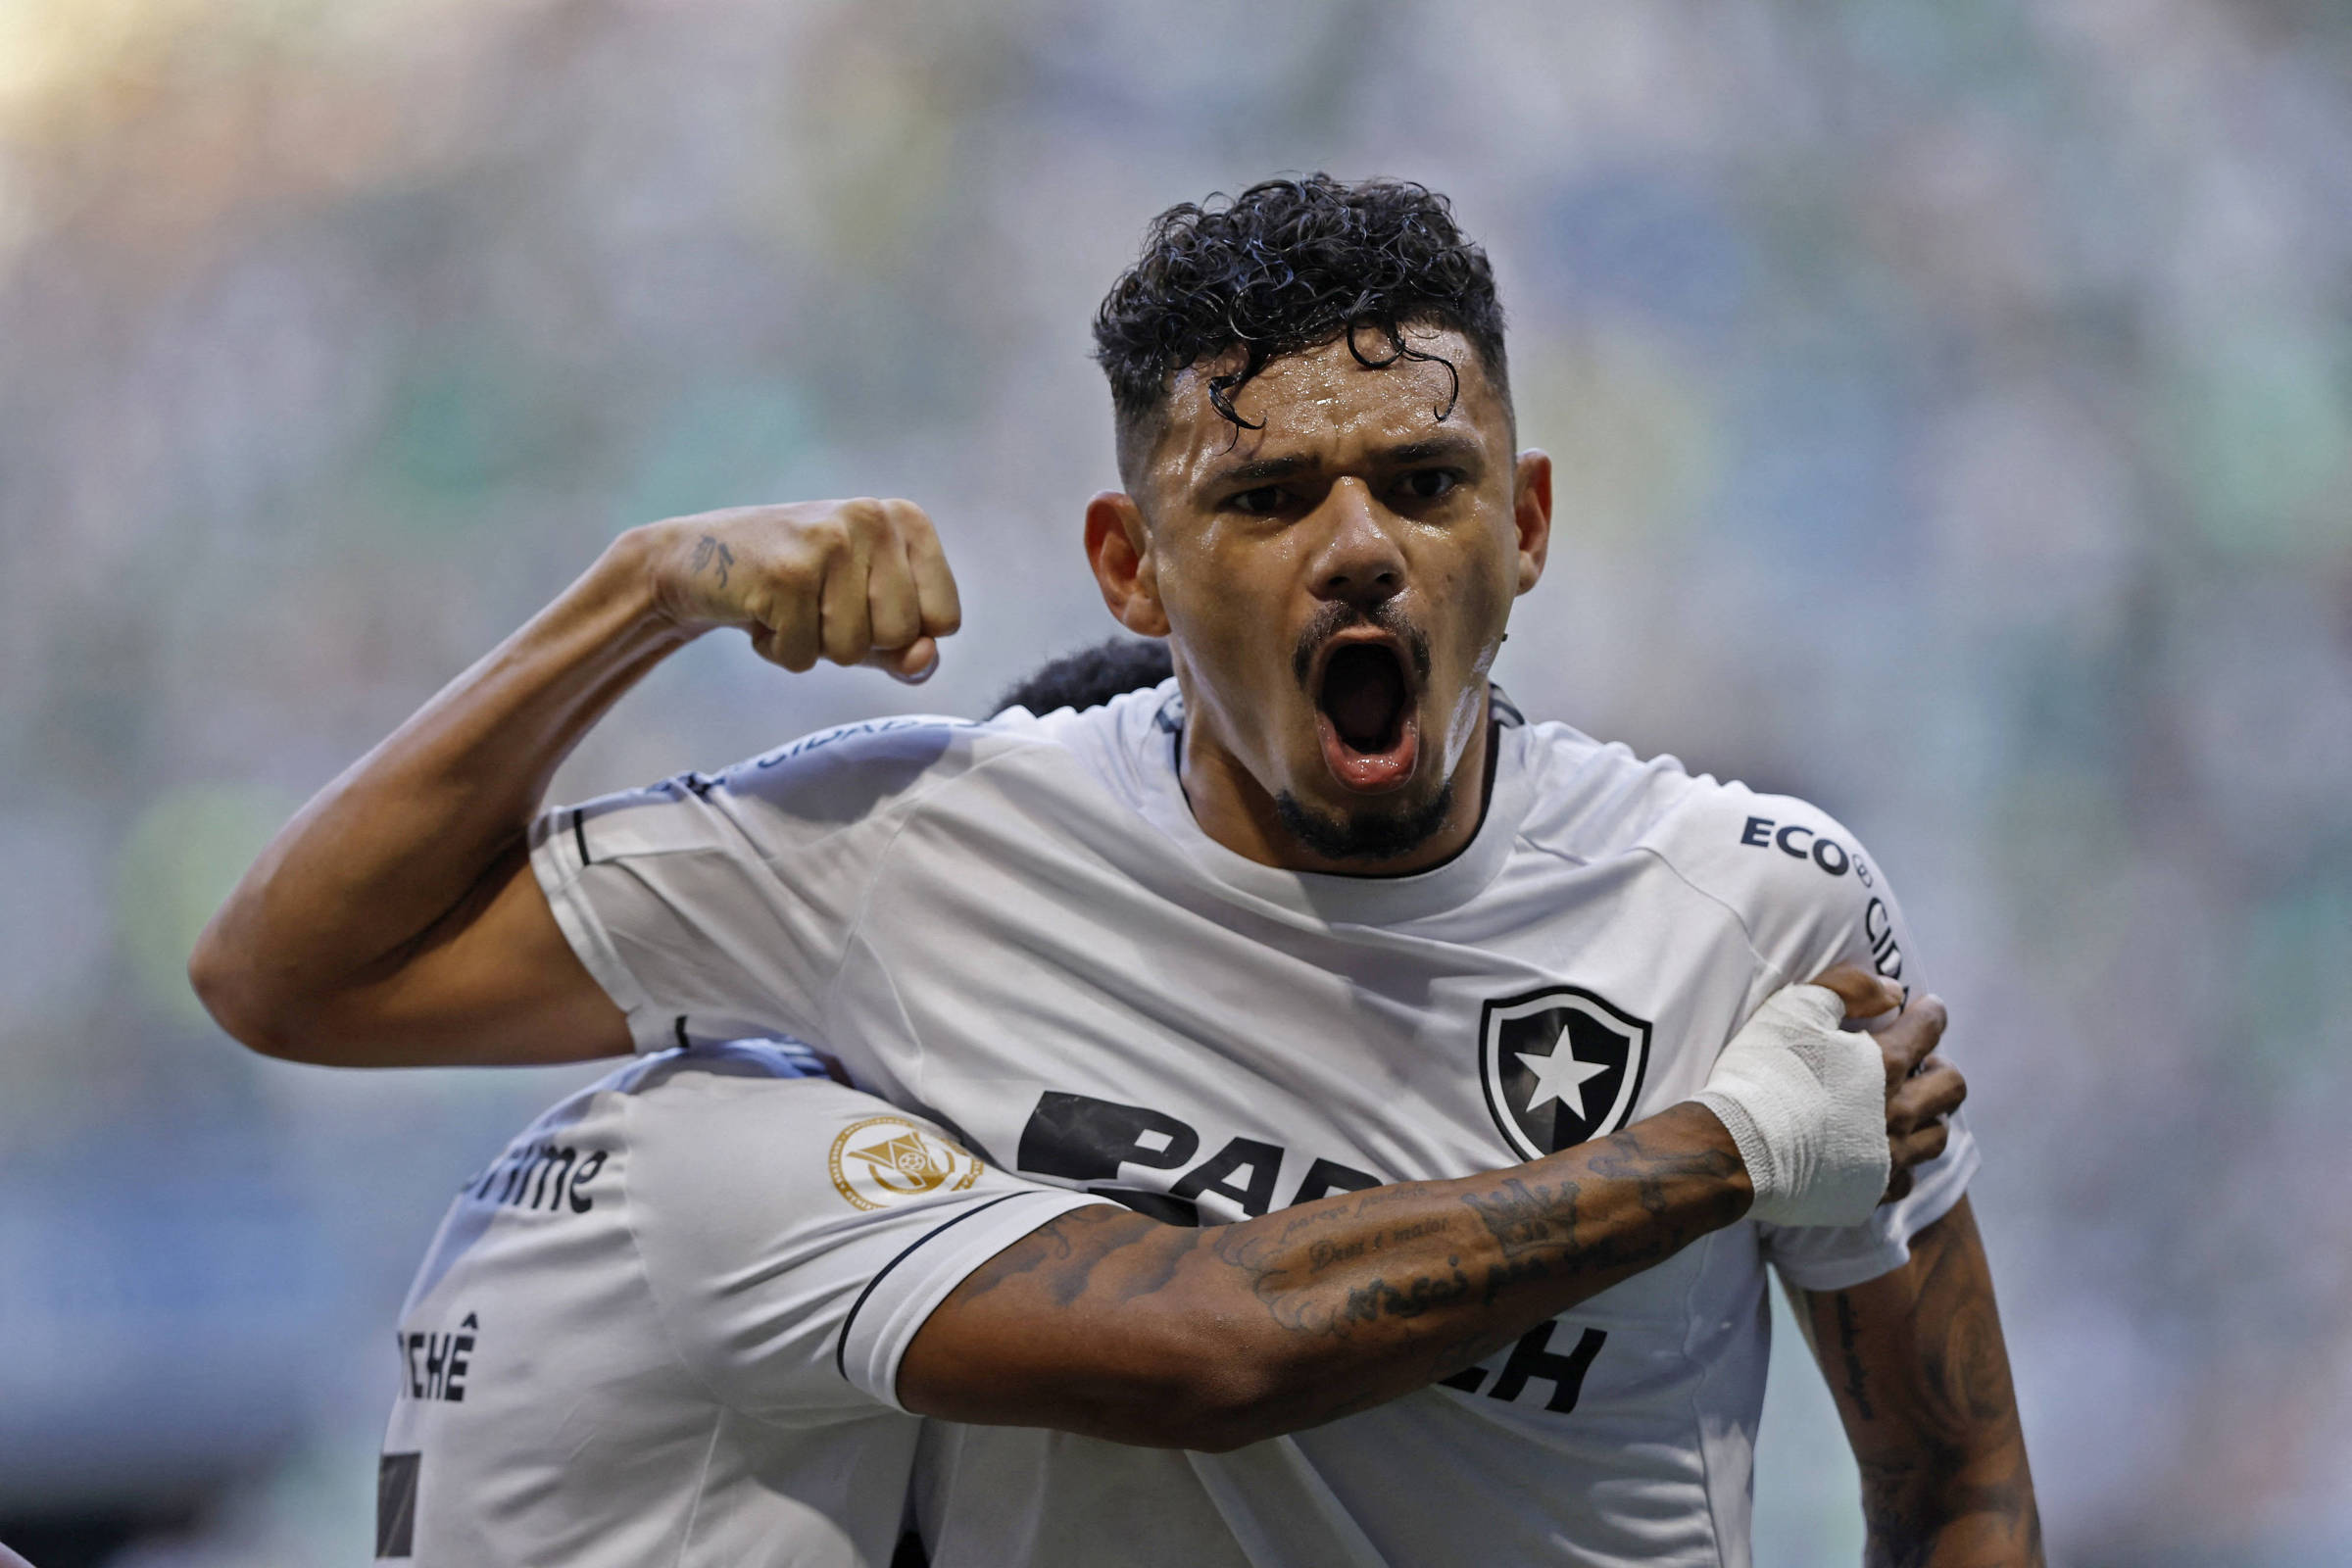 Opinion – PVC: Botafogo is a sign that Brazil needs work